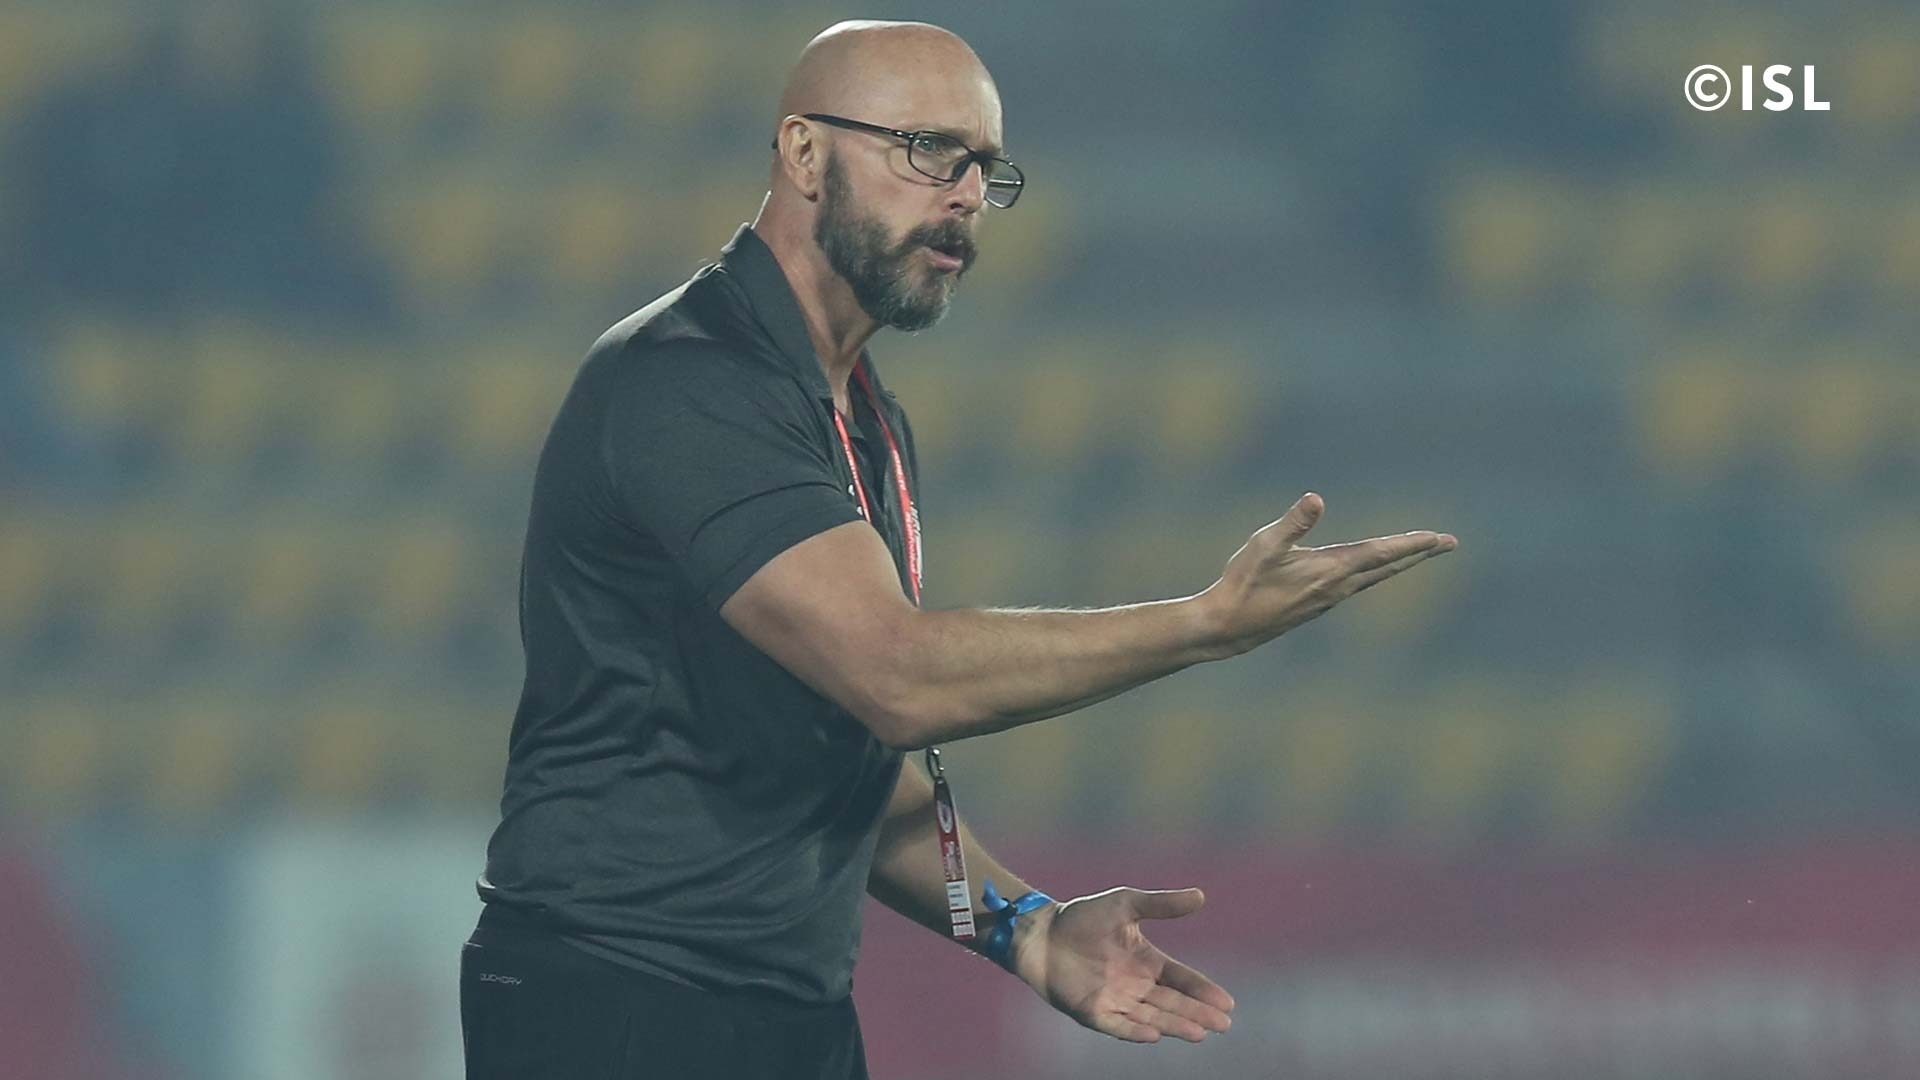 All players at Kerala Blasters FC were happy except two or three, claims Eelco Schattorie